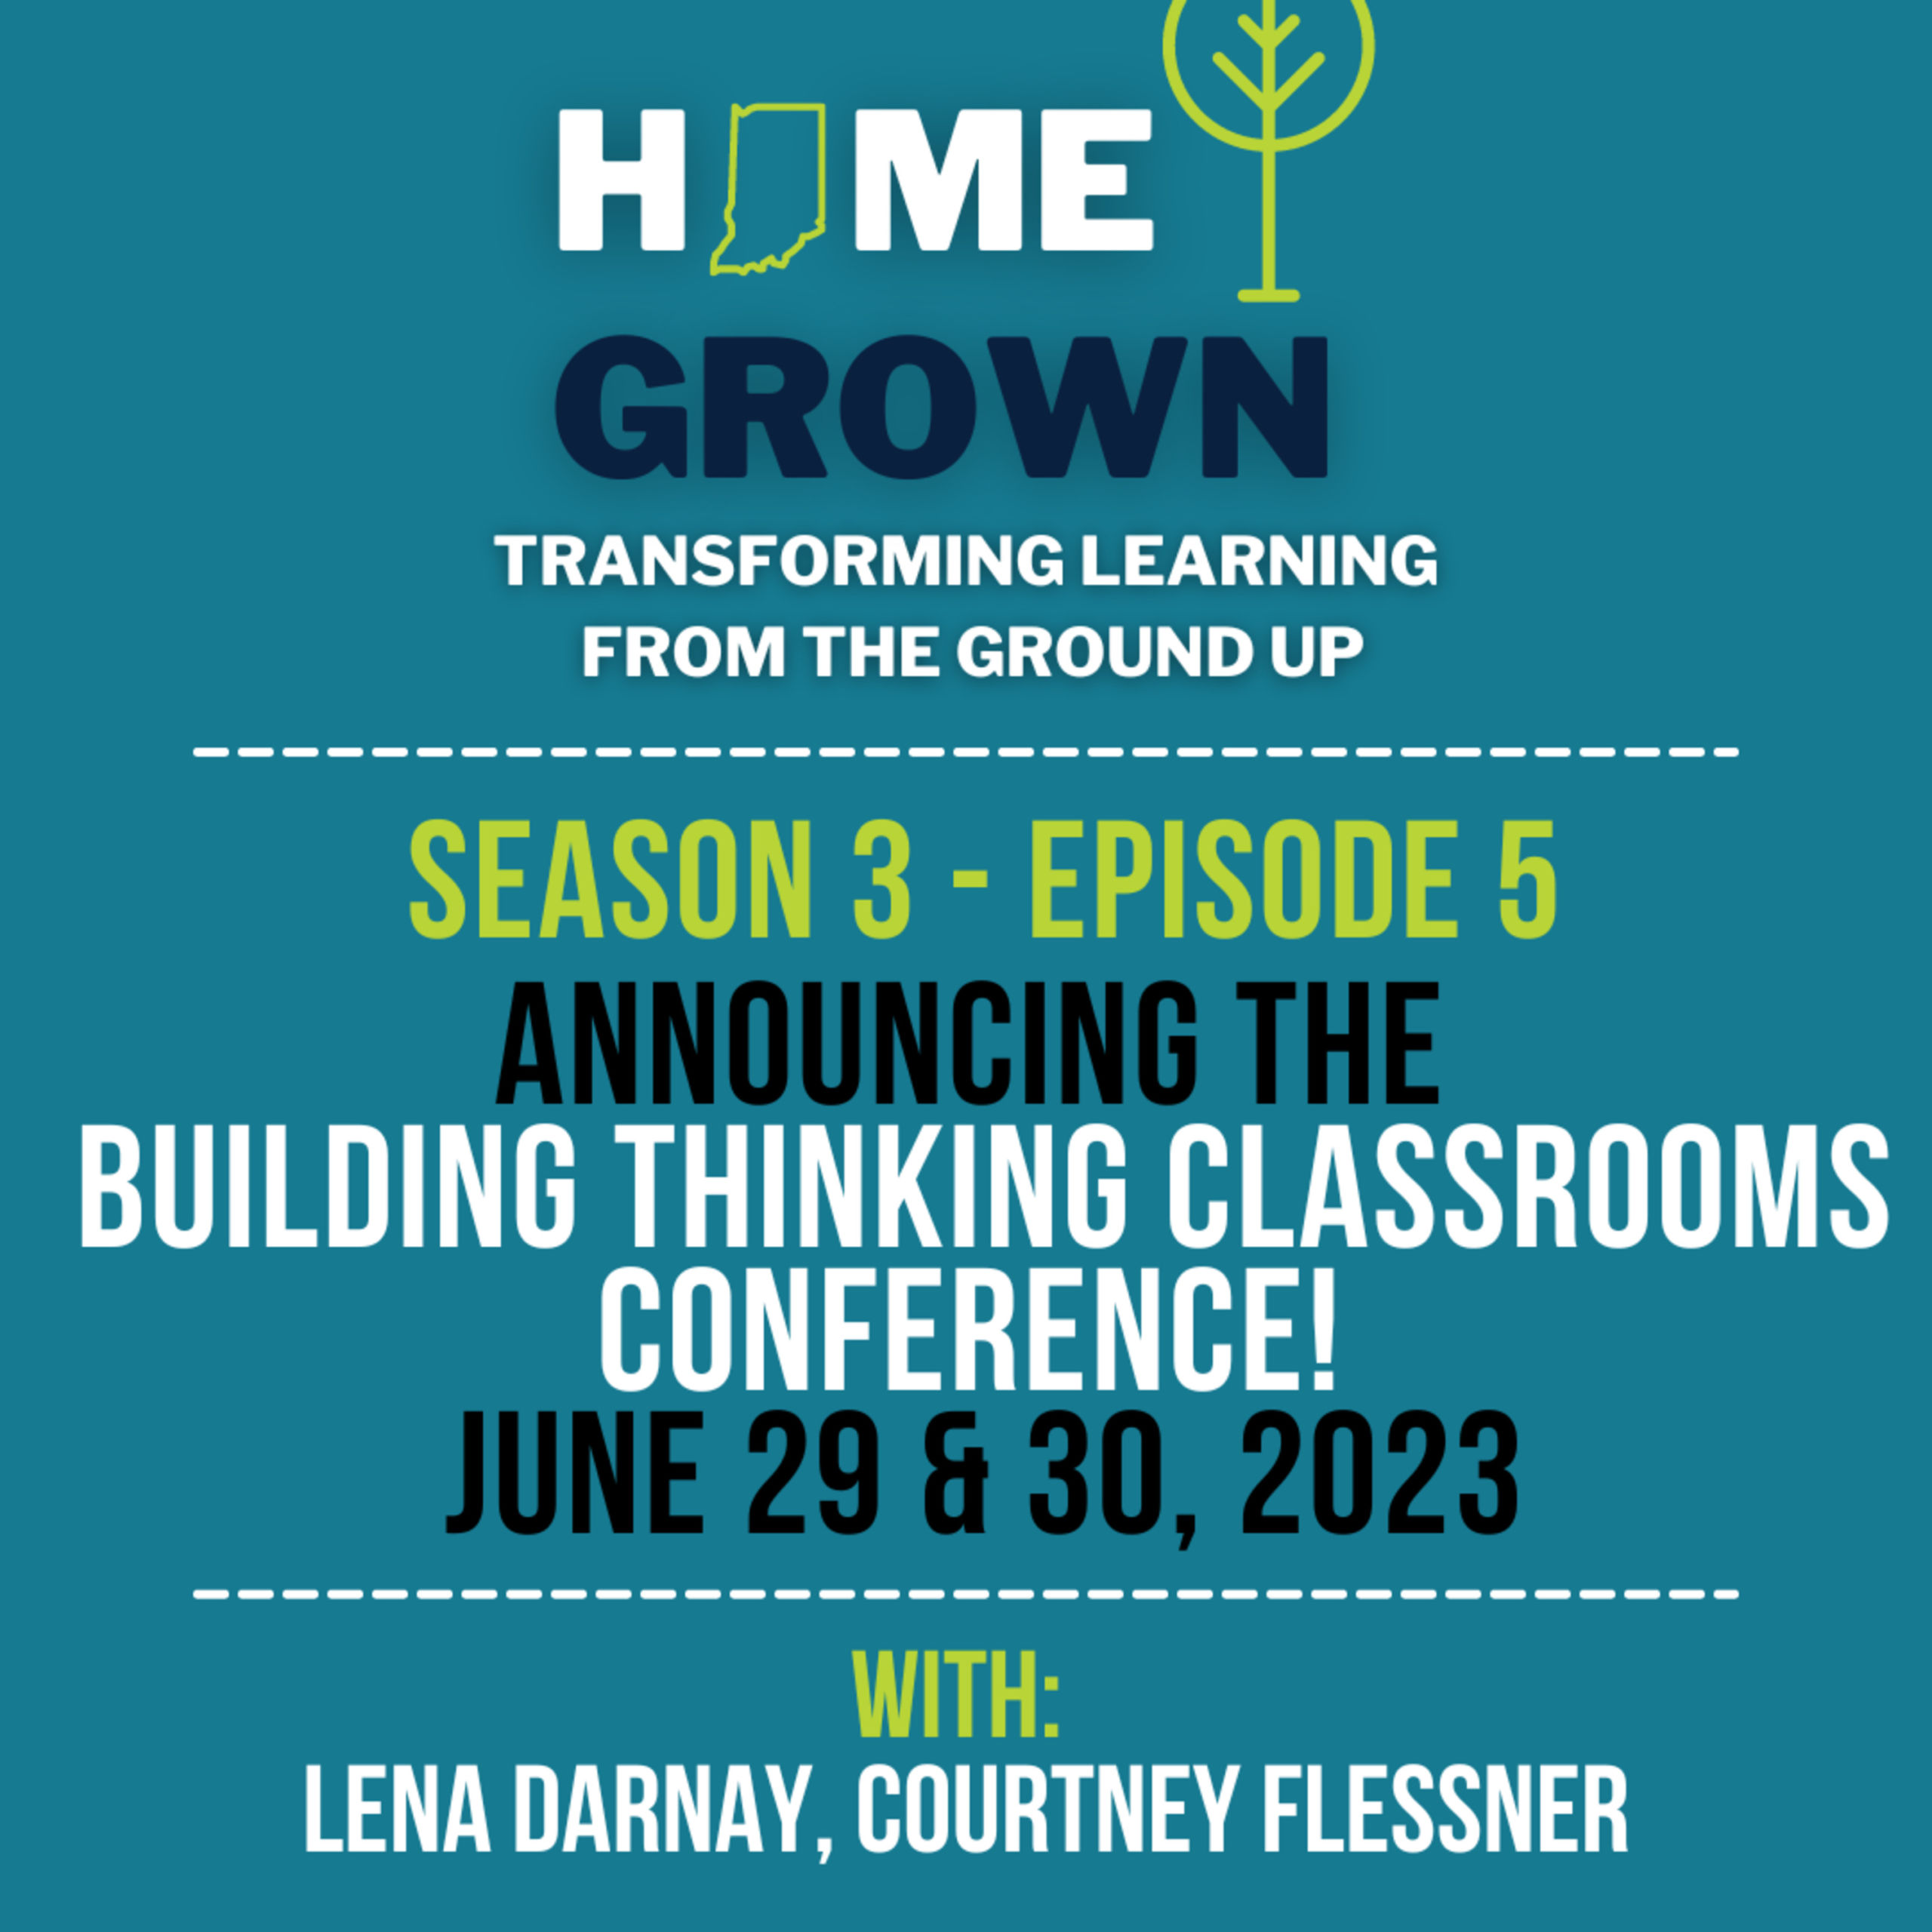 Season 3 Episode 5 Building Thinking Classrooms Conference Save the